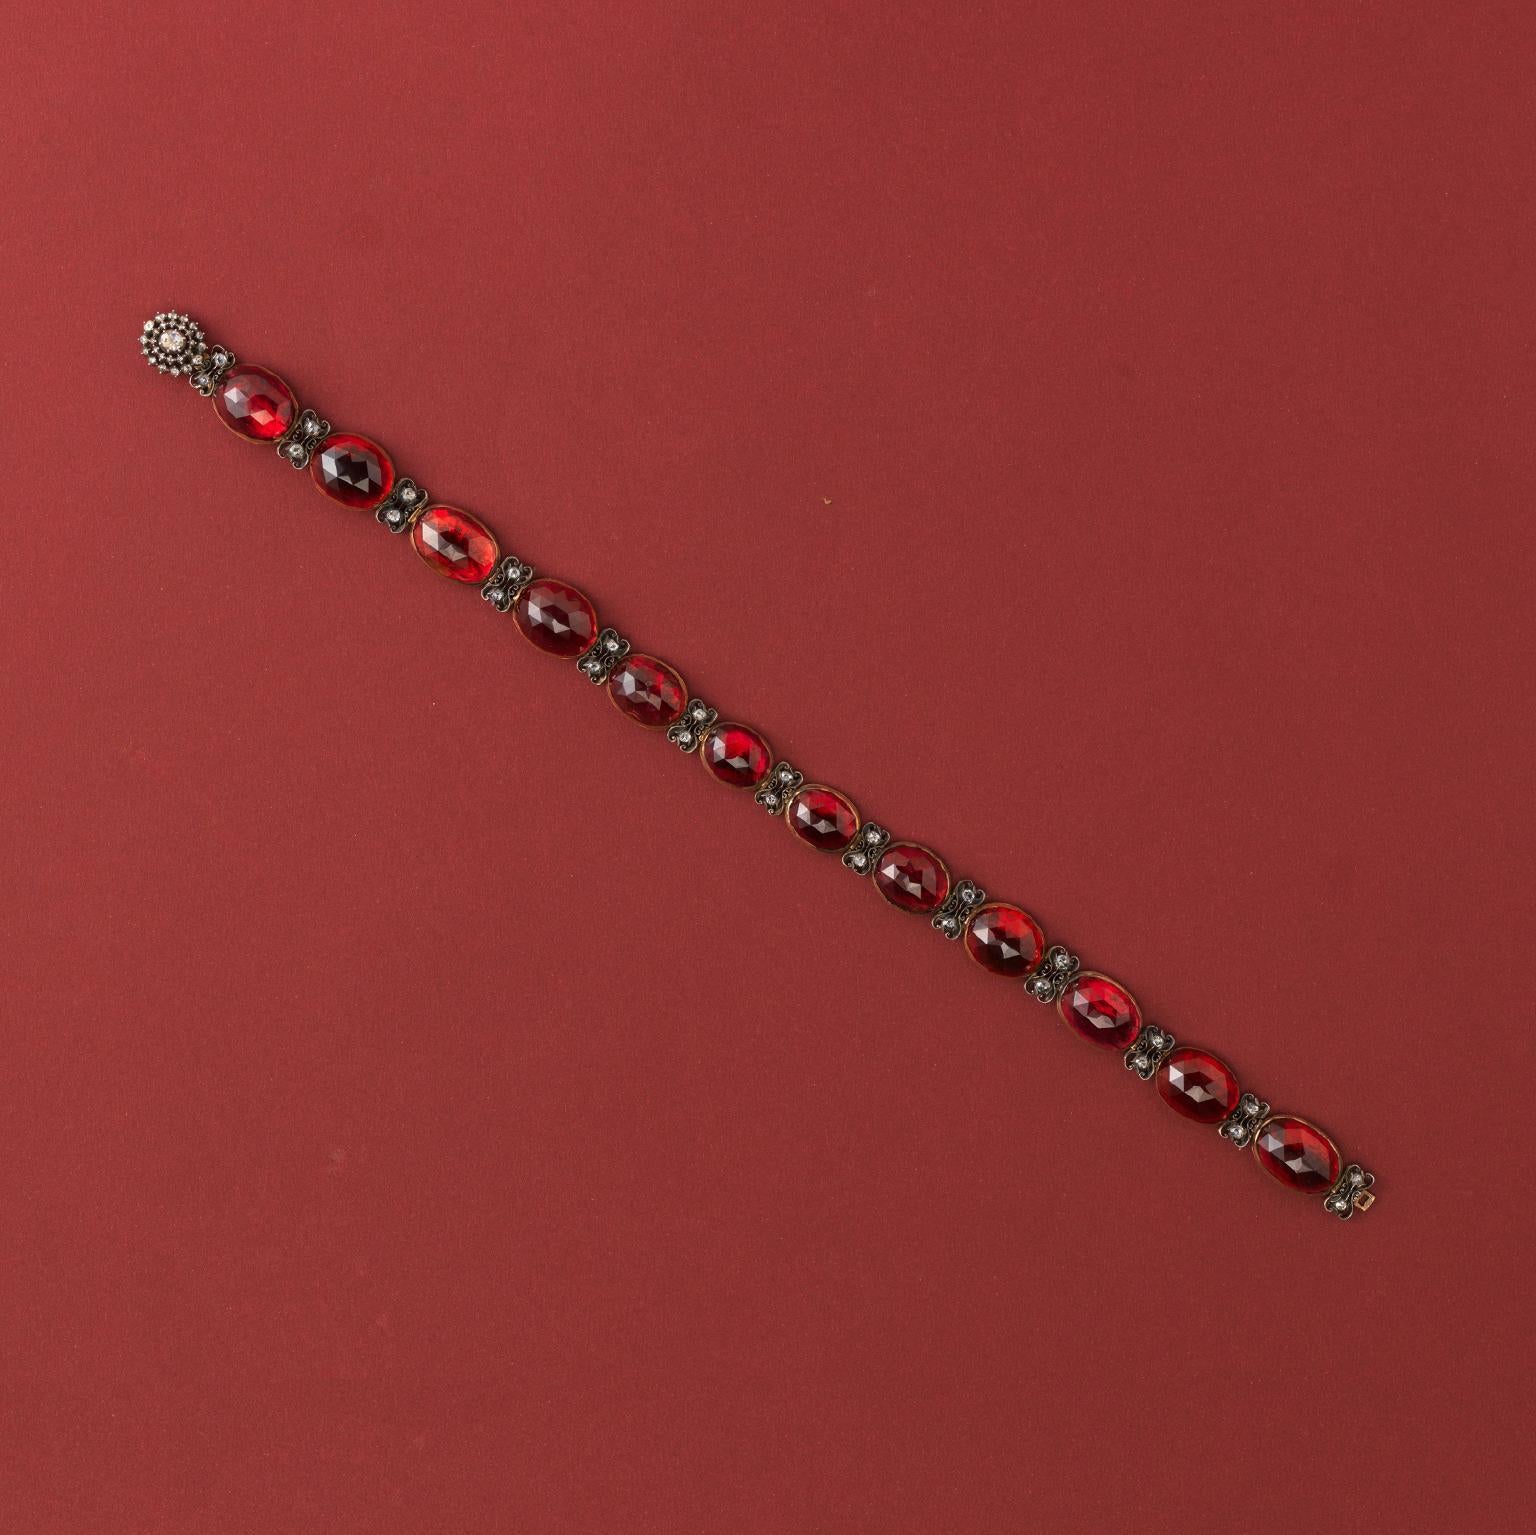 A collier de chien consisting of 12 large oval rose cut garnets set in gold alternated with floral silver elements in which are two old cut diamonds vertically set decorated with a tulip decoration also at the back, circa 1820, Dutch, to be worn